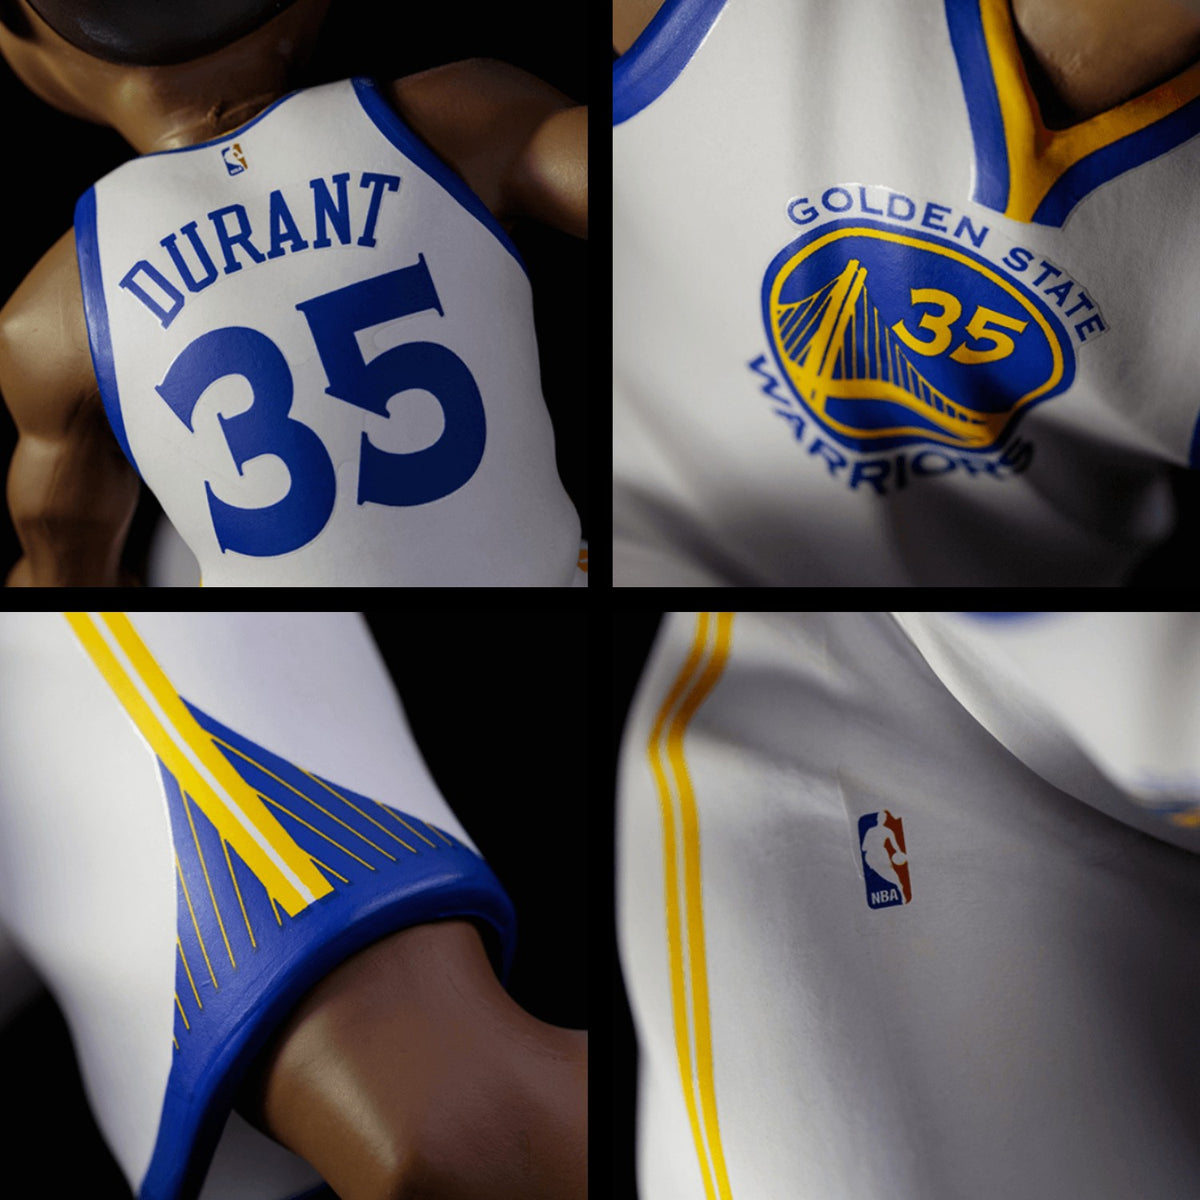 Kevin Durant Collectibles: Limited Edition Warriors' smALL-STARS